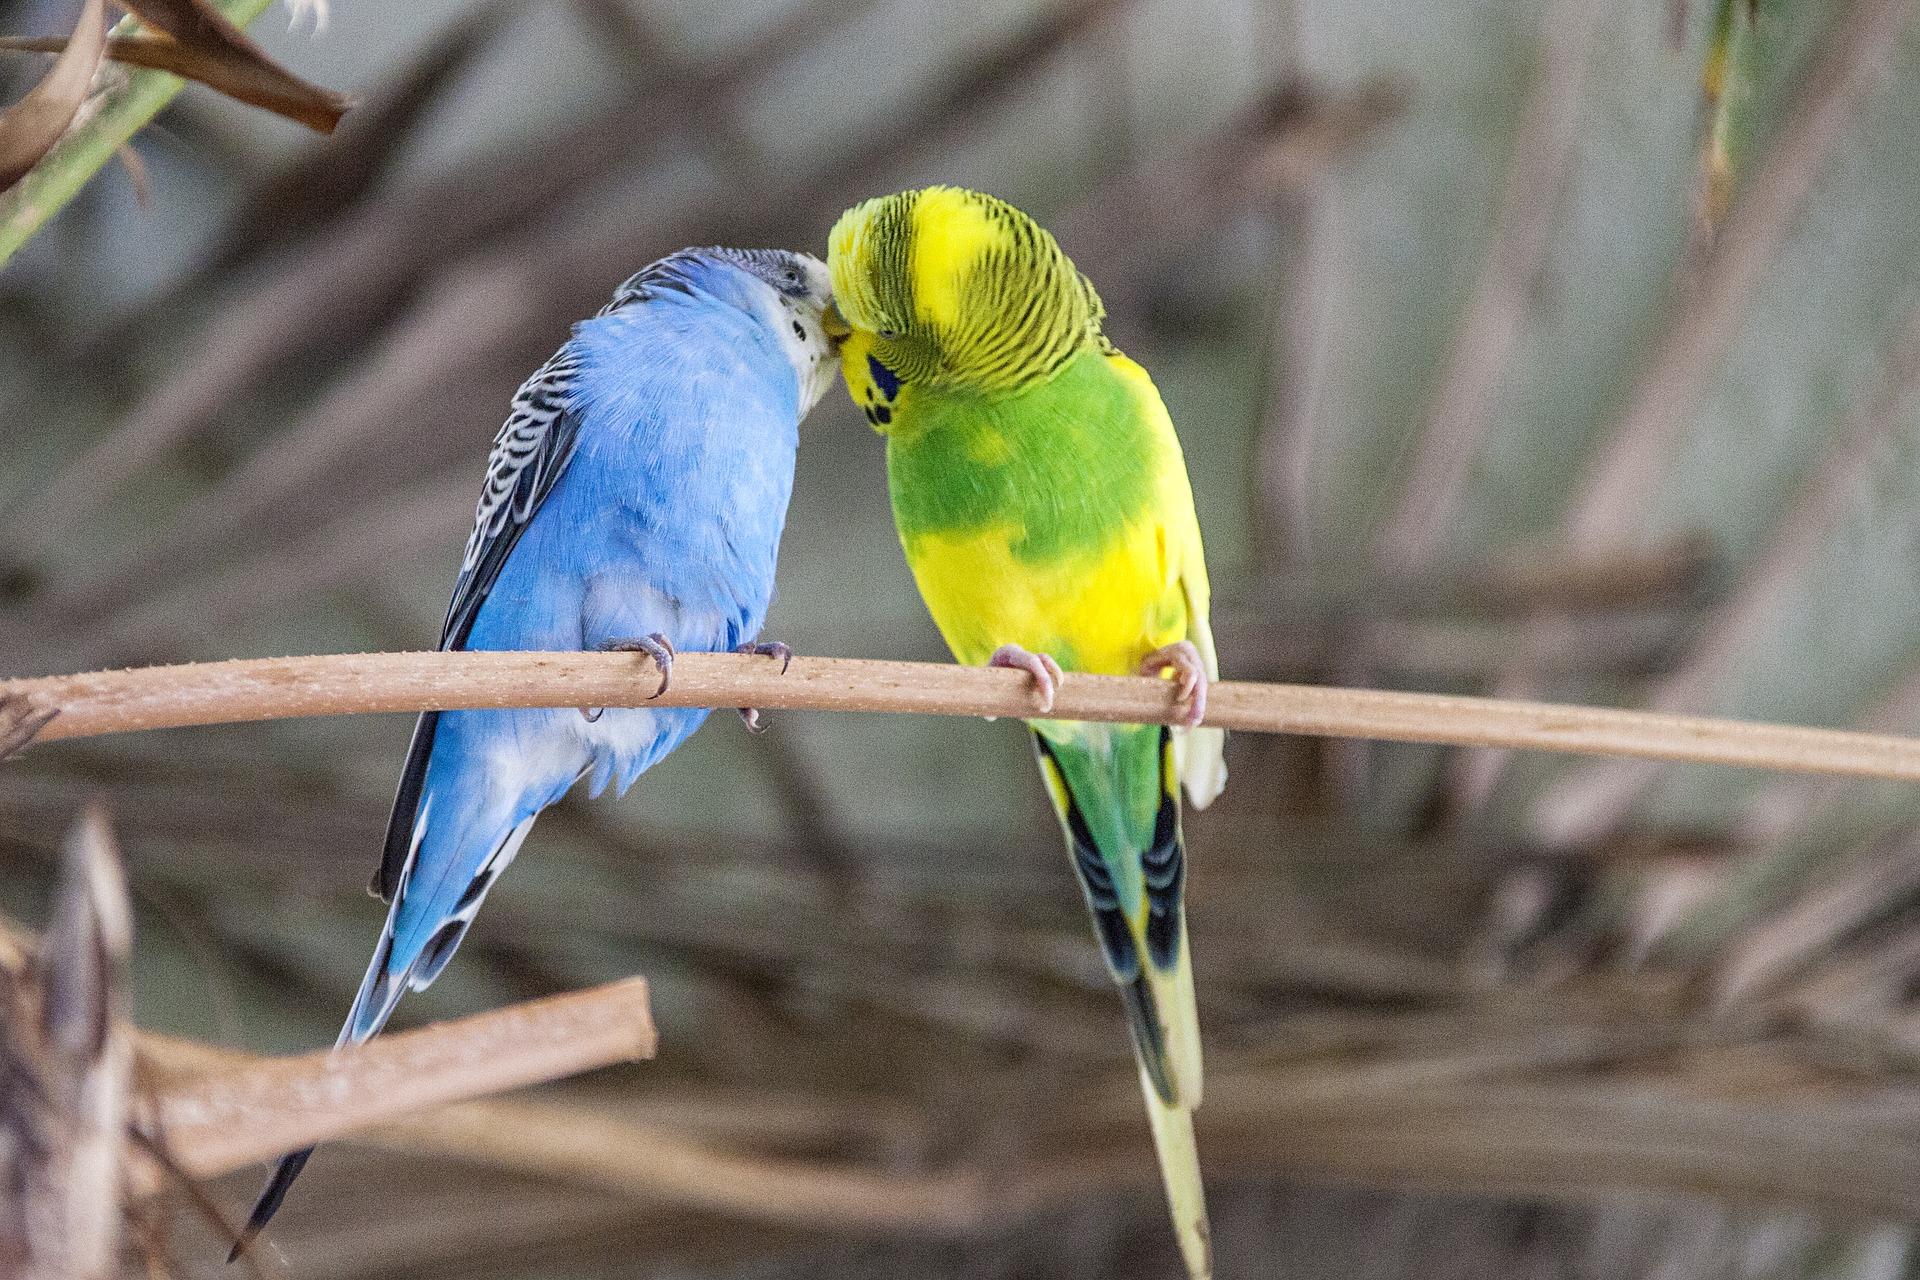 where do parakeets come from